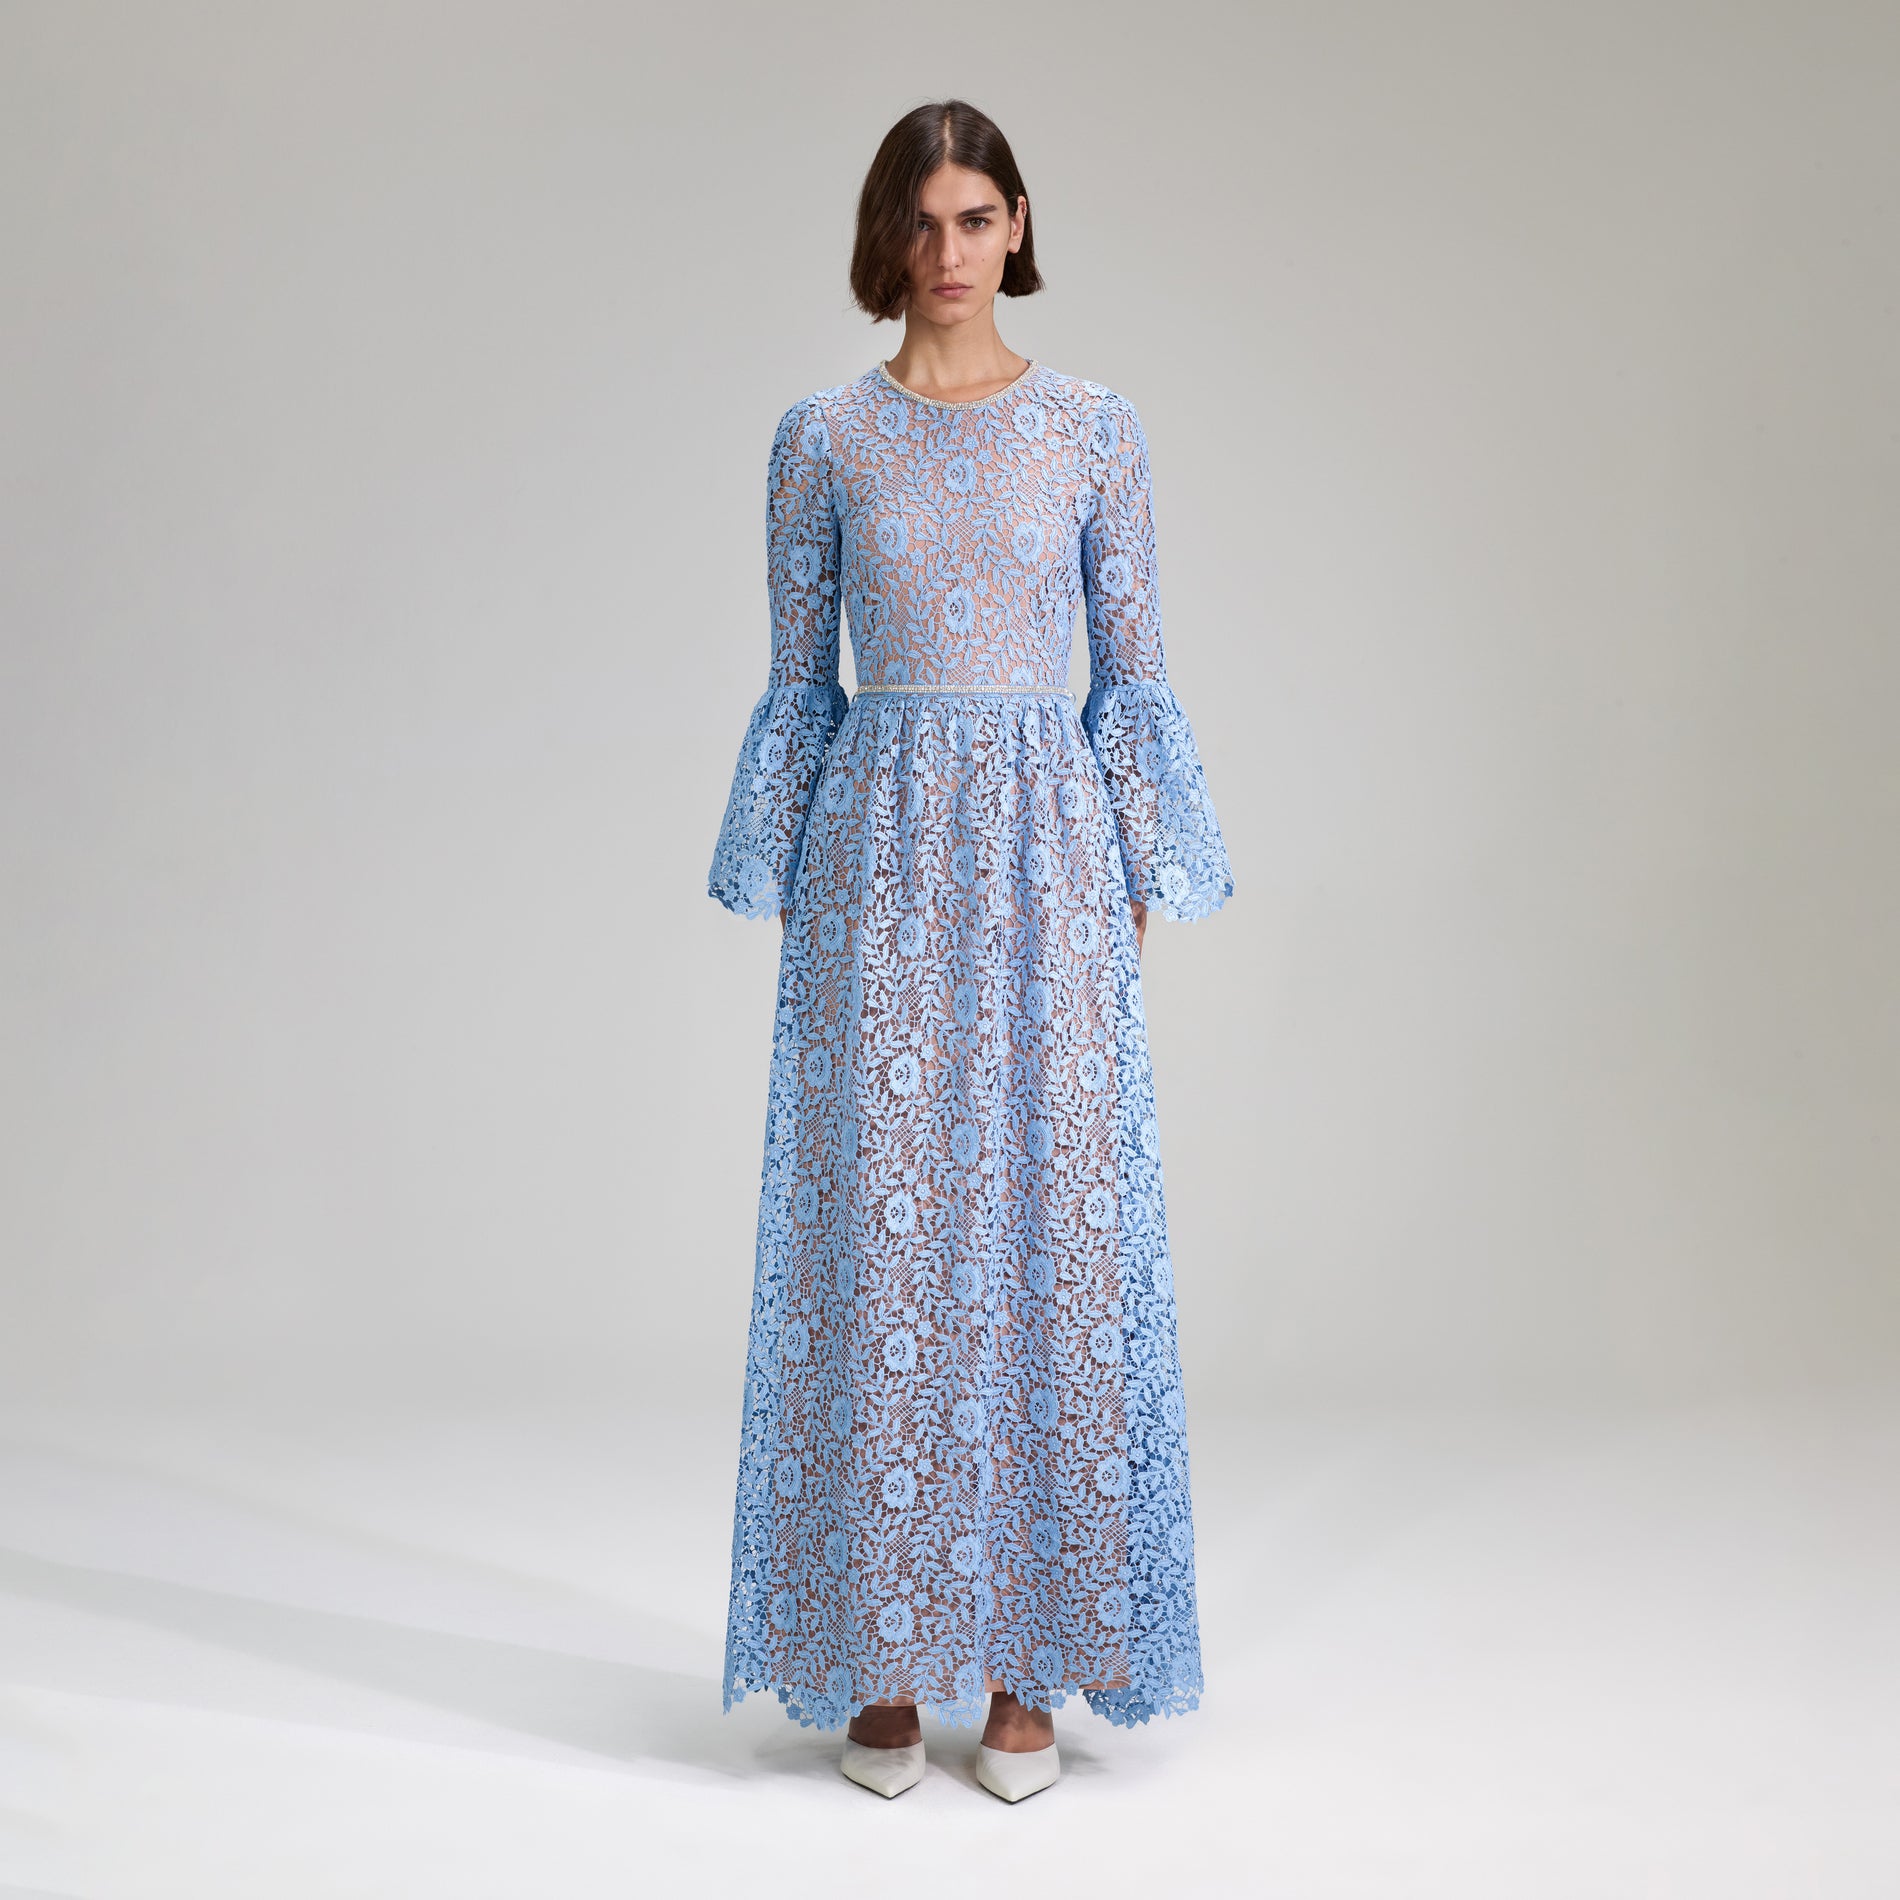 A woman wearing the Blue Rose Lace Maxi Dress